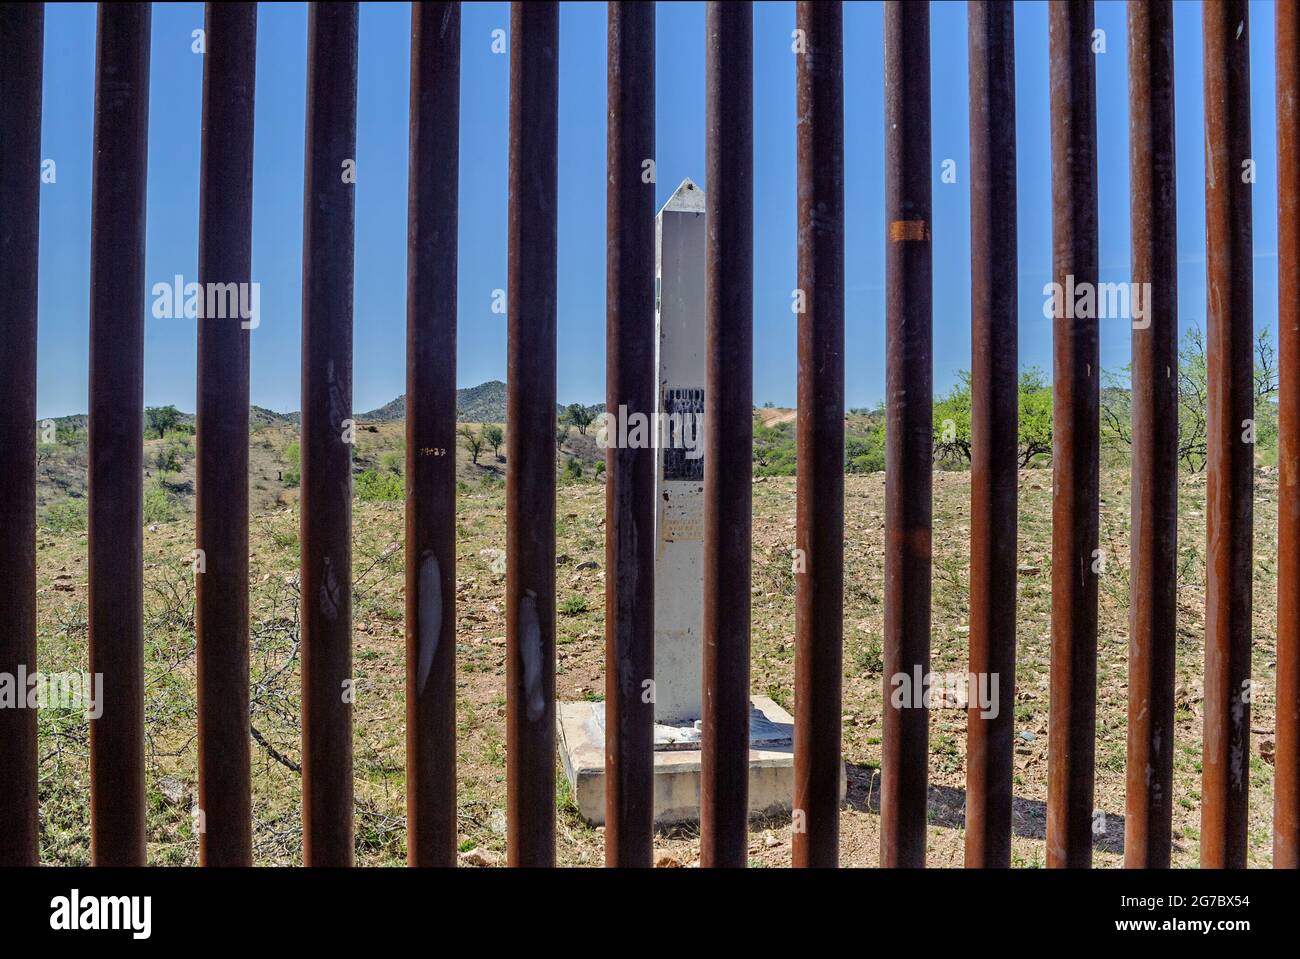 Image shows US border fence and white historic boundary monument on the Mexico border, west of Nogales Arizona and Nogales Sonora Mexico . This type o Stock Photo